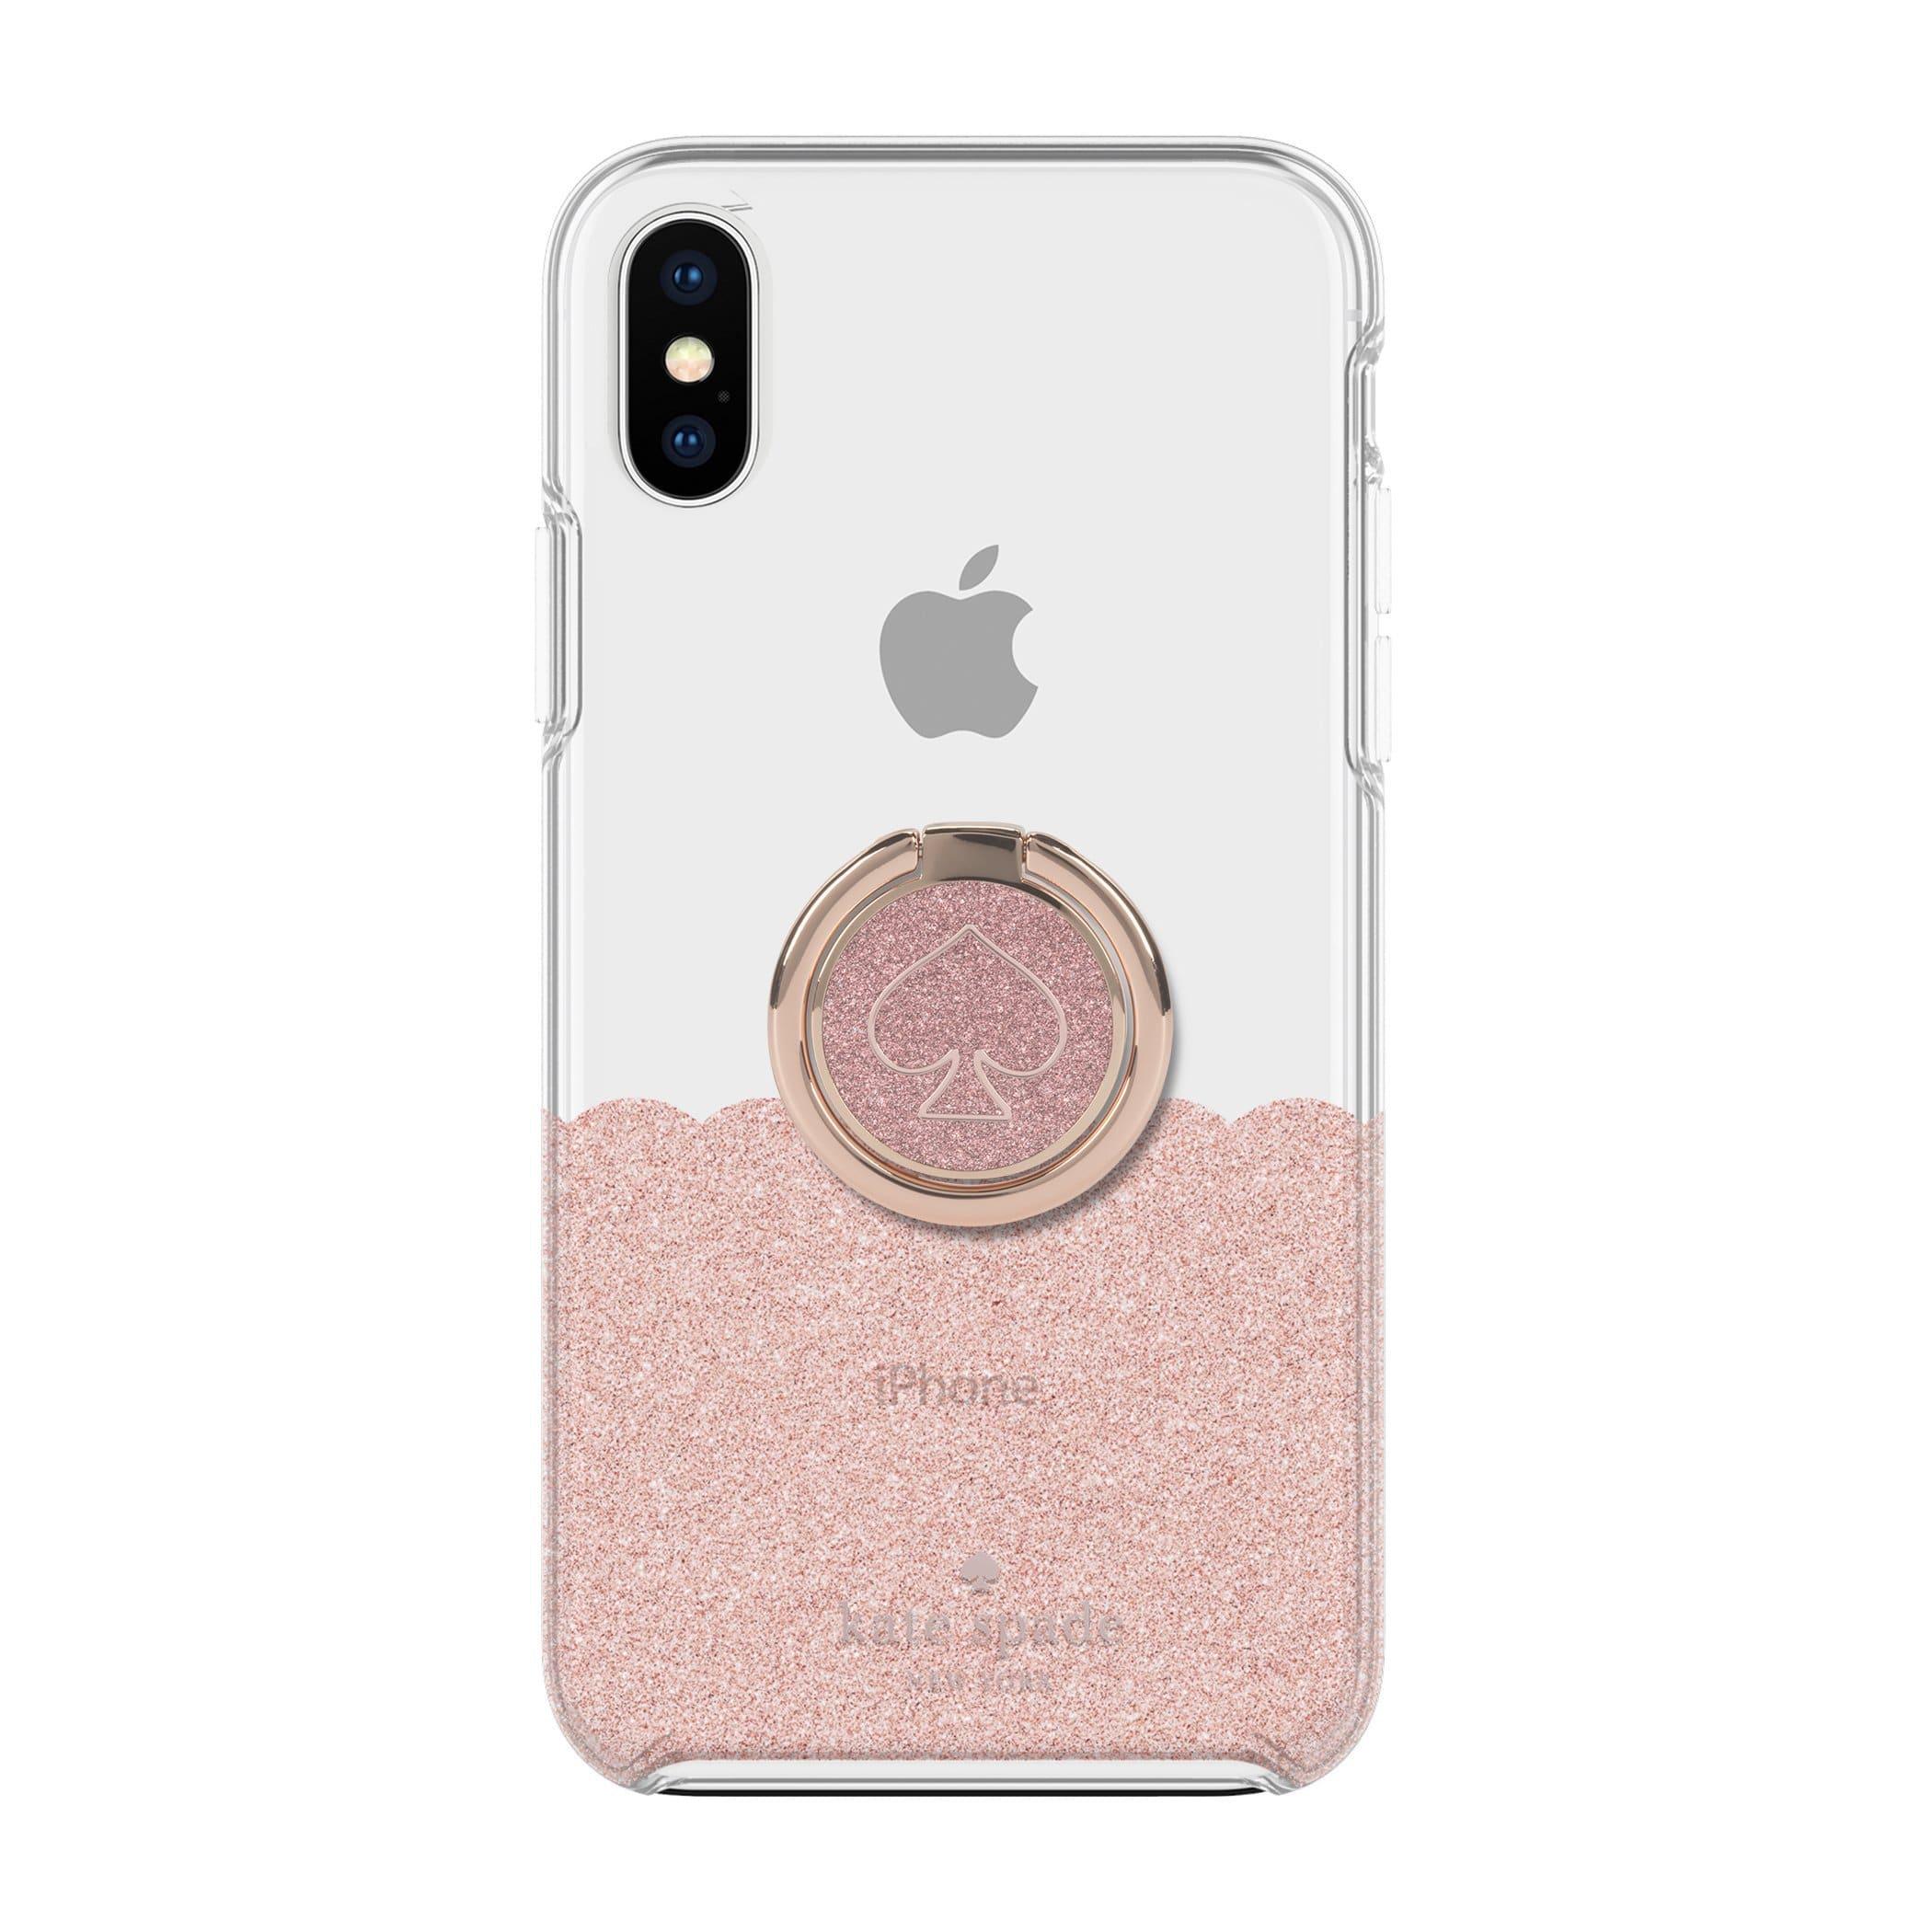 kate spade new york iphone xs x gift set ring stand protective hardshell case scallop rose gold glitter clear